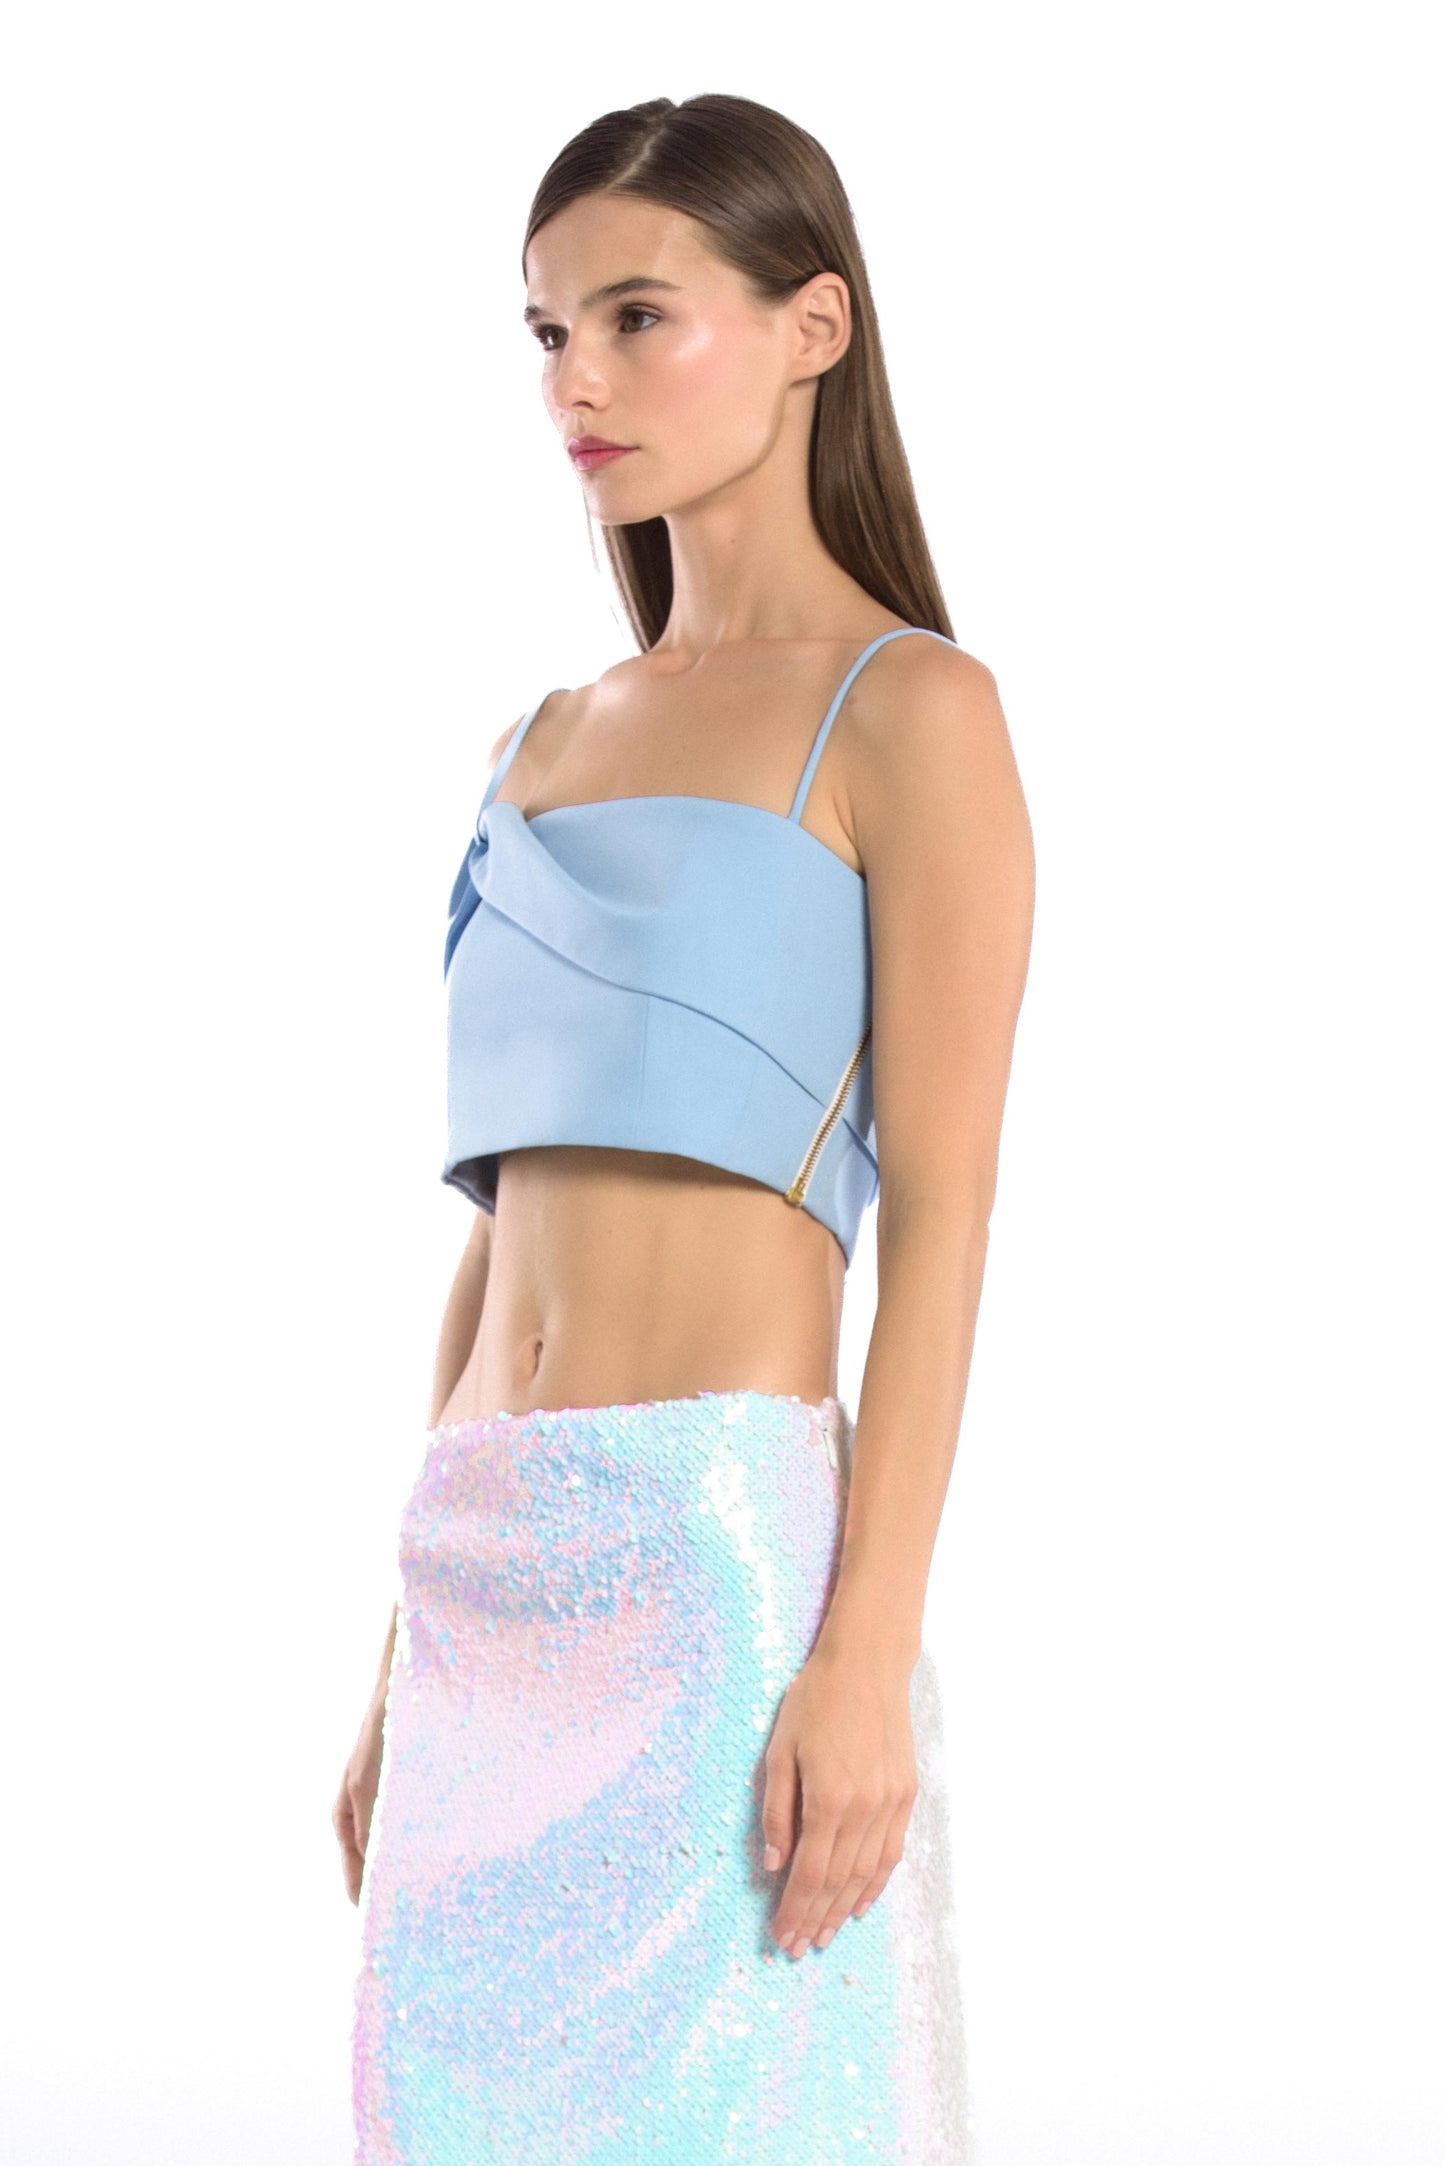 Model wearing asymmetric off shoulder crepe crop top in pastel blue color and iridescent sequins mini skirt